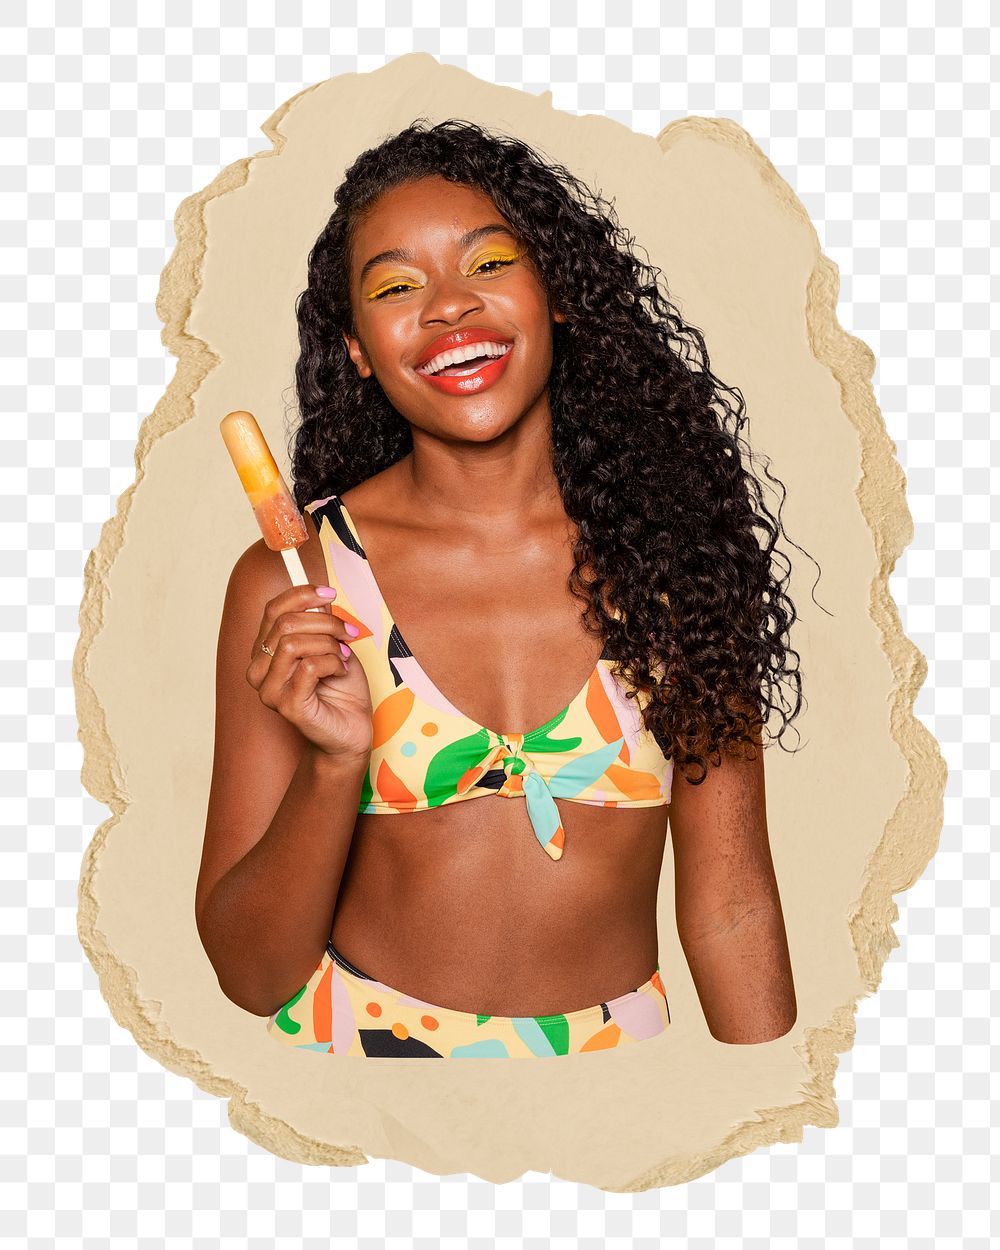 Cheerful Summer girl png sticker, ripped paper, transparent background